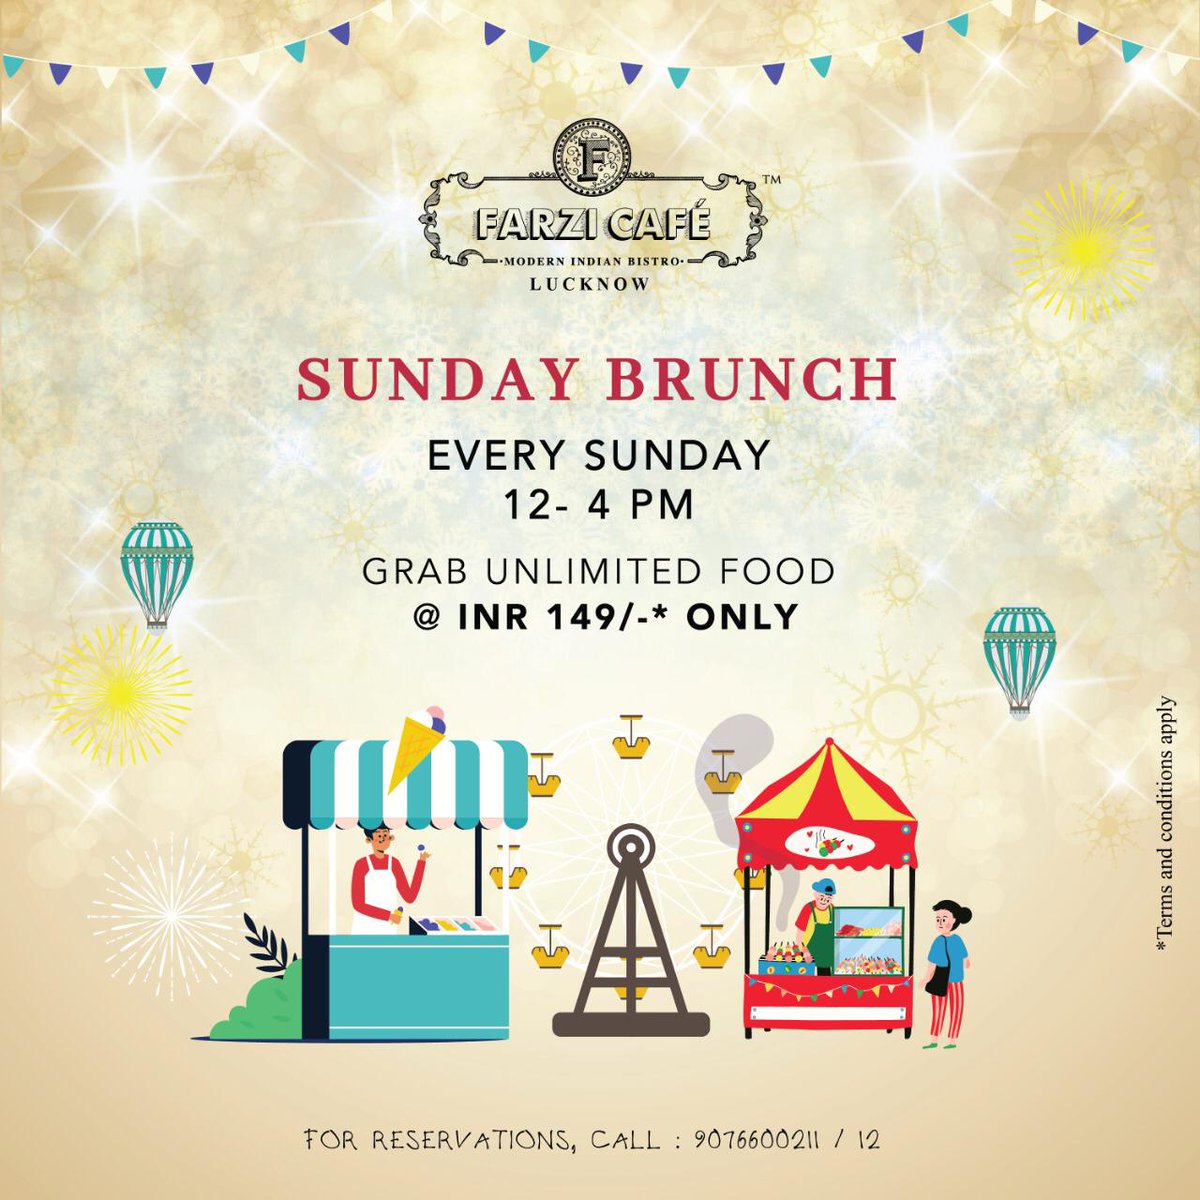 Enjoy Unlimited Sunday Brunch only @ INR 149/- in  @FarziCafe #Lucknow
#food #foodie